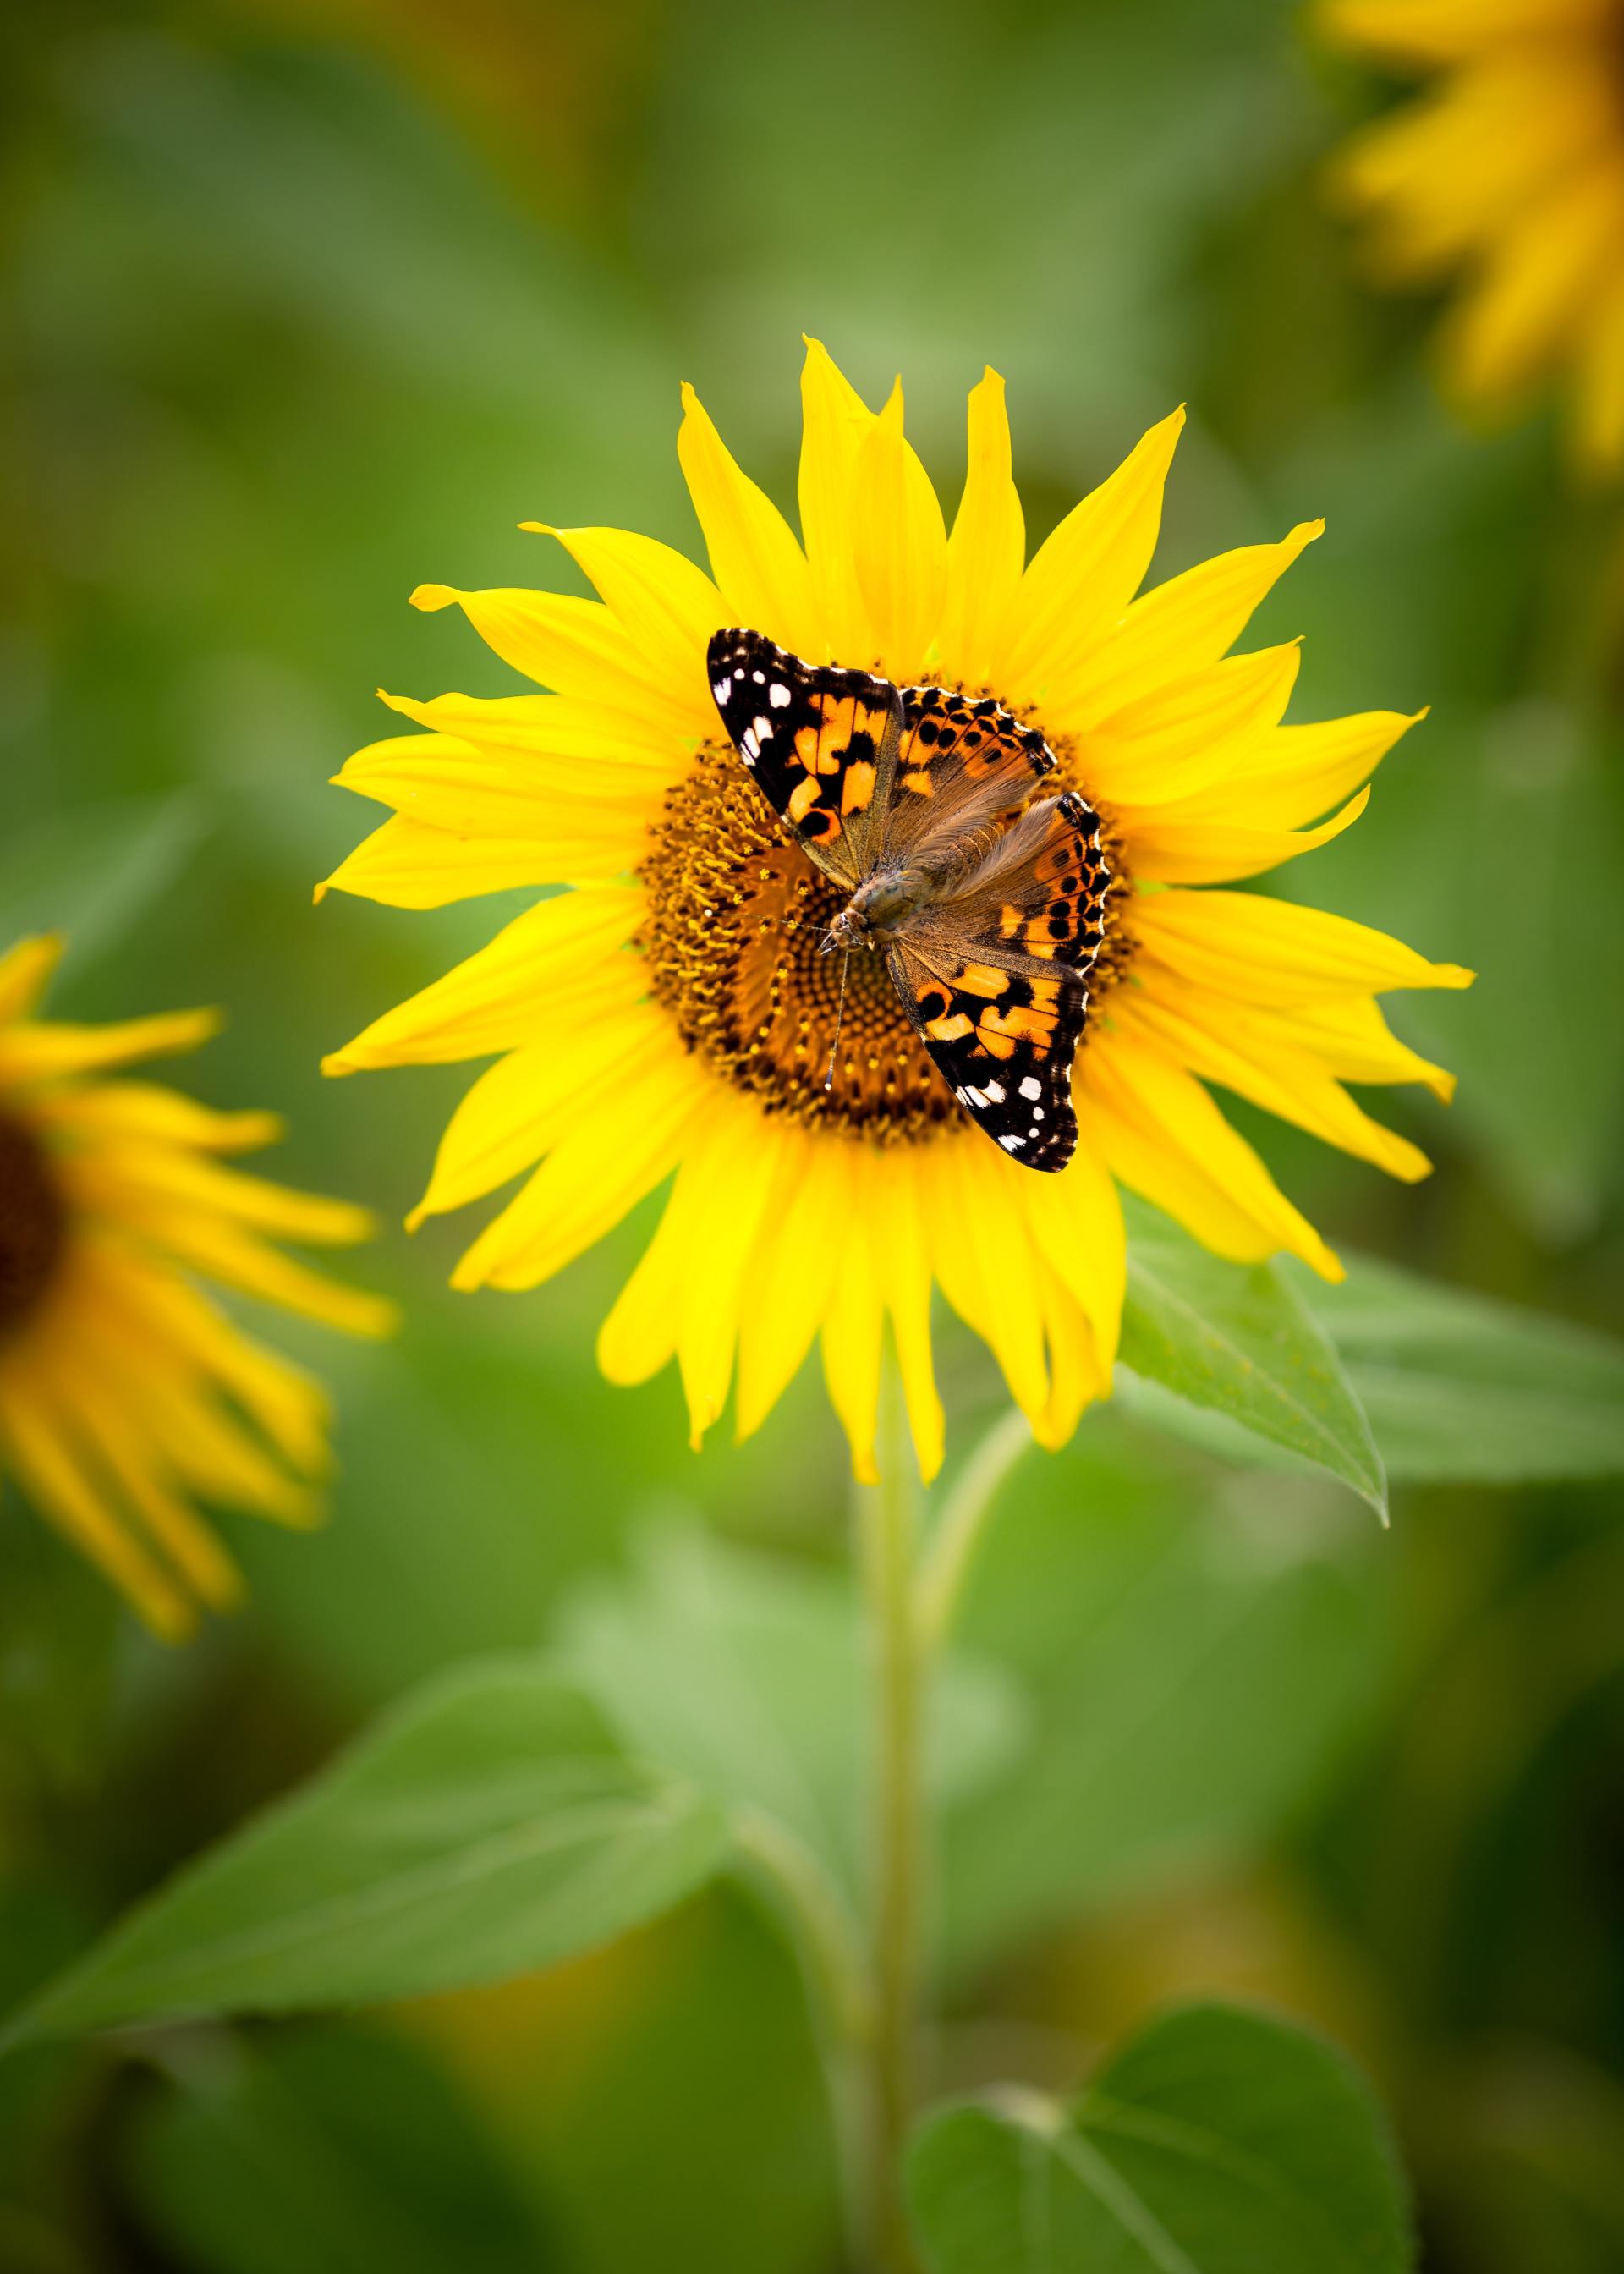 Sunflower, Picture from unsplash.com